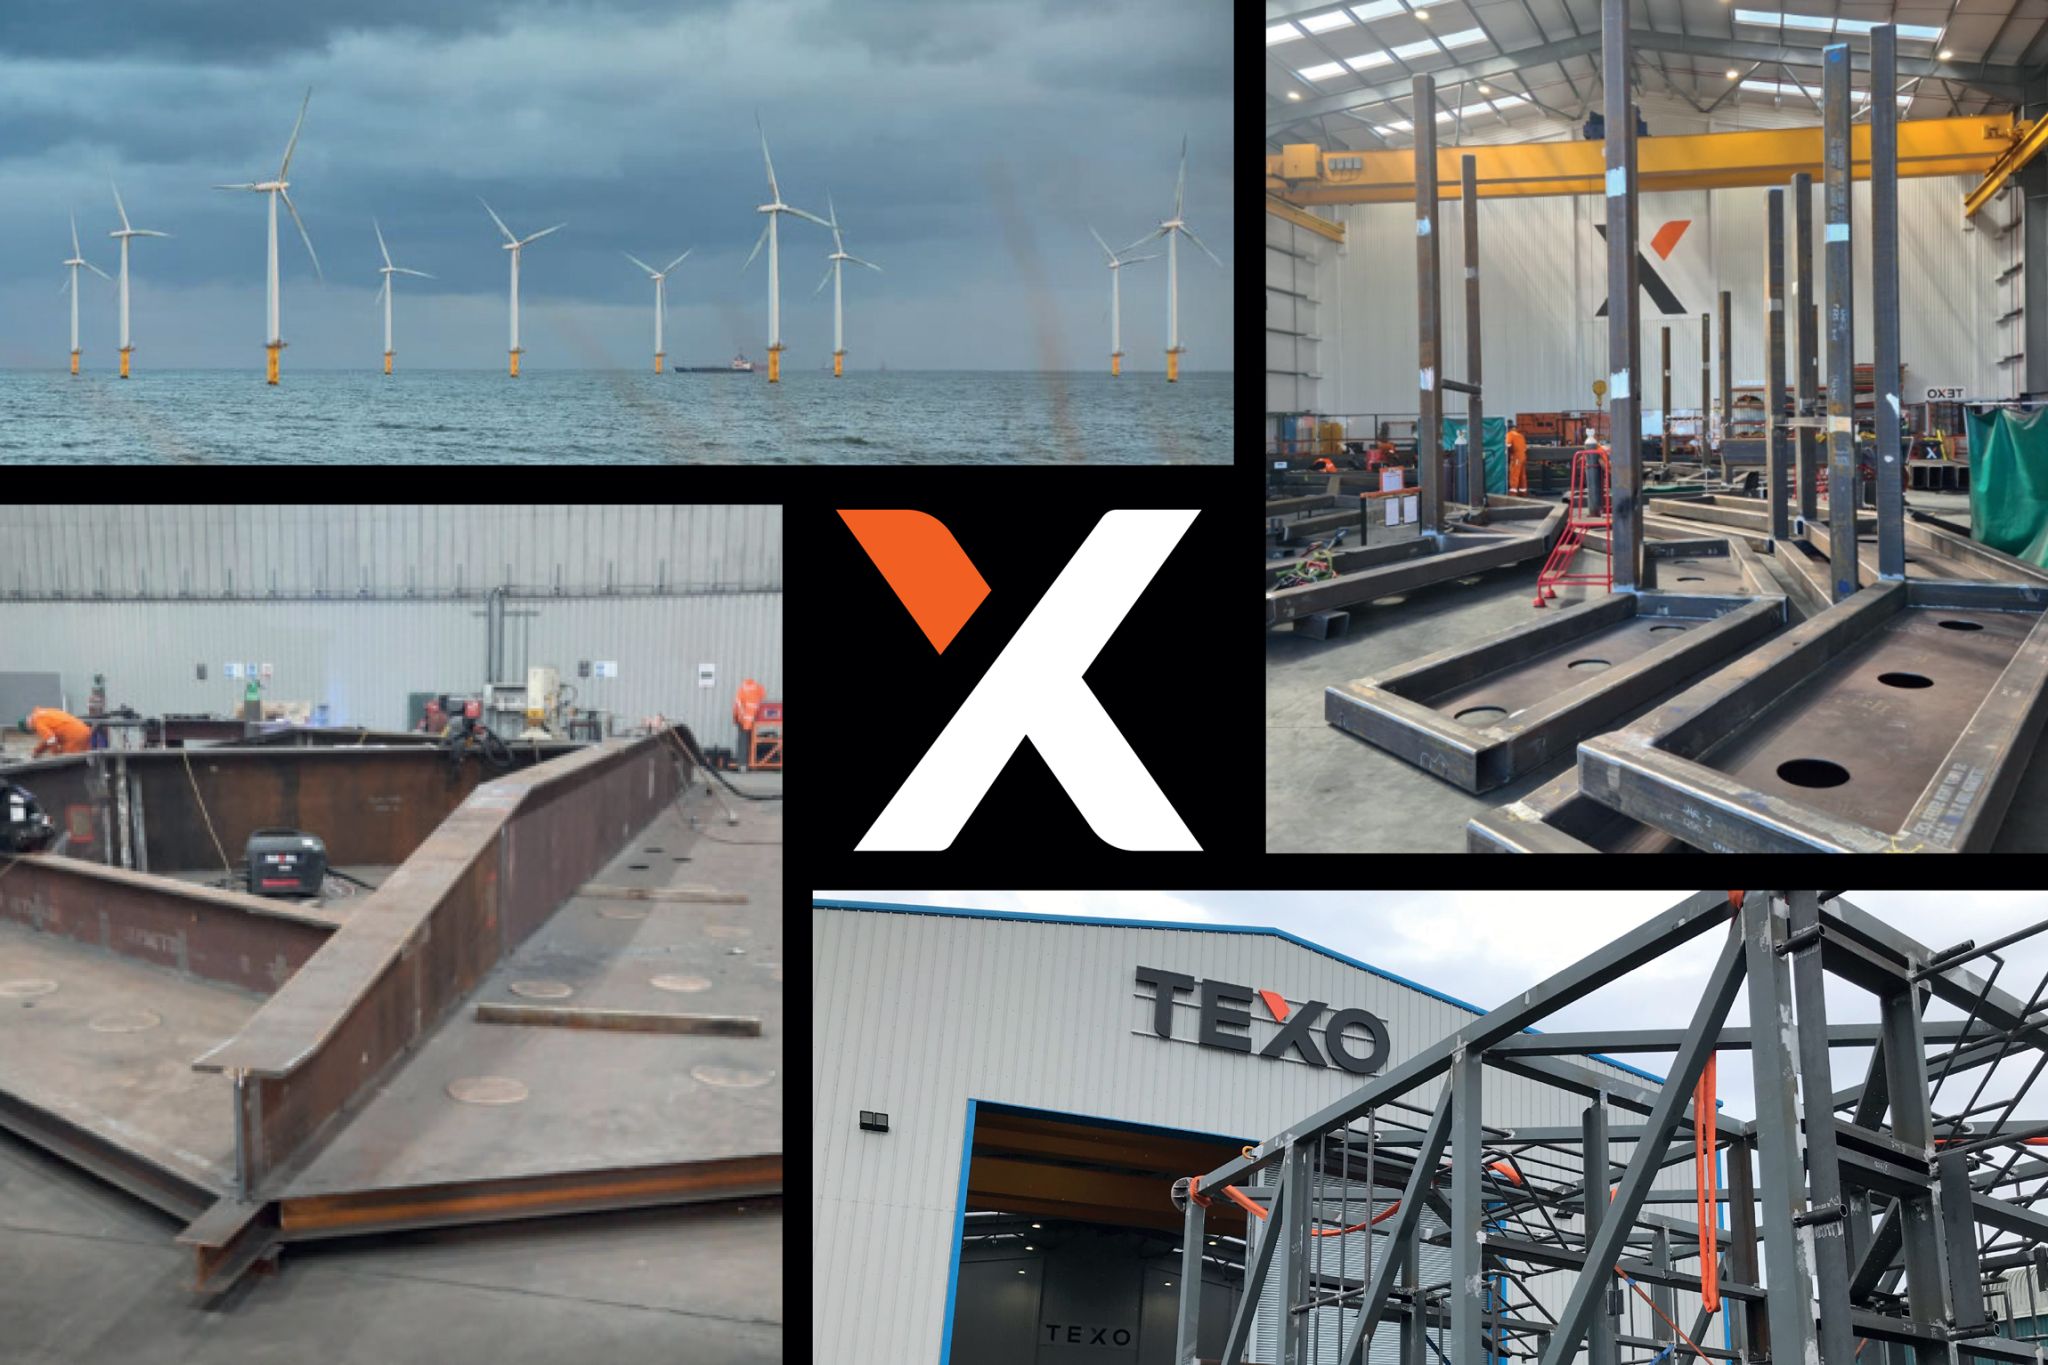 TEXO's image showing an offshore wind farm and steel structures at its yaed